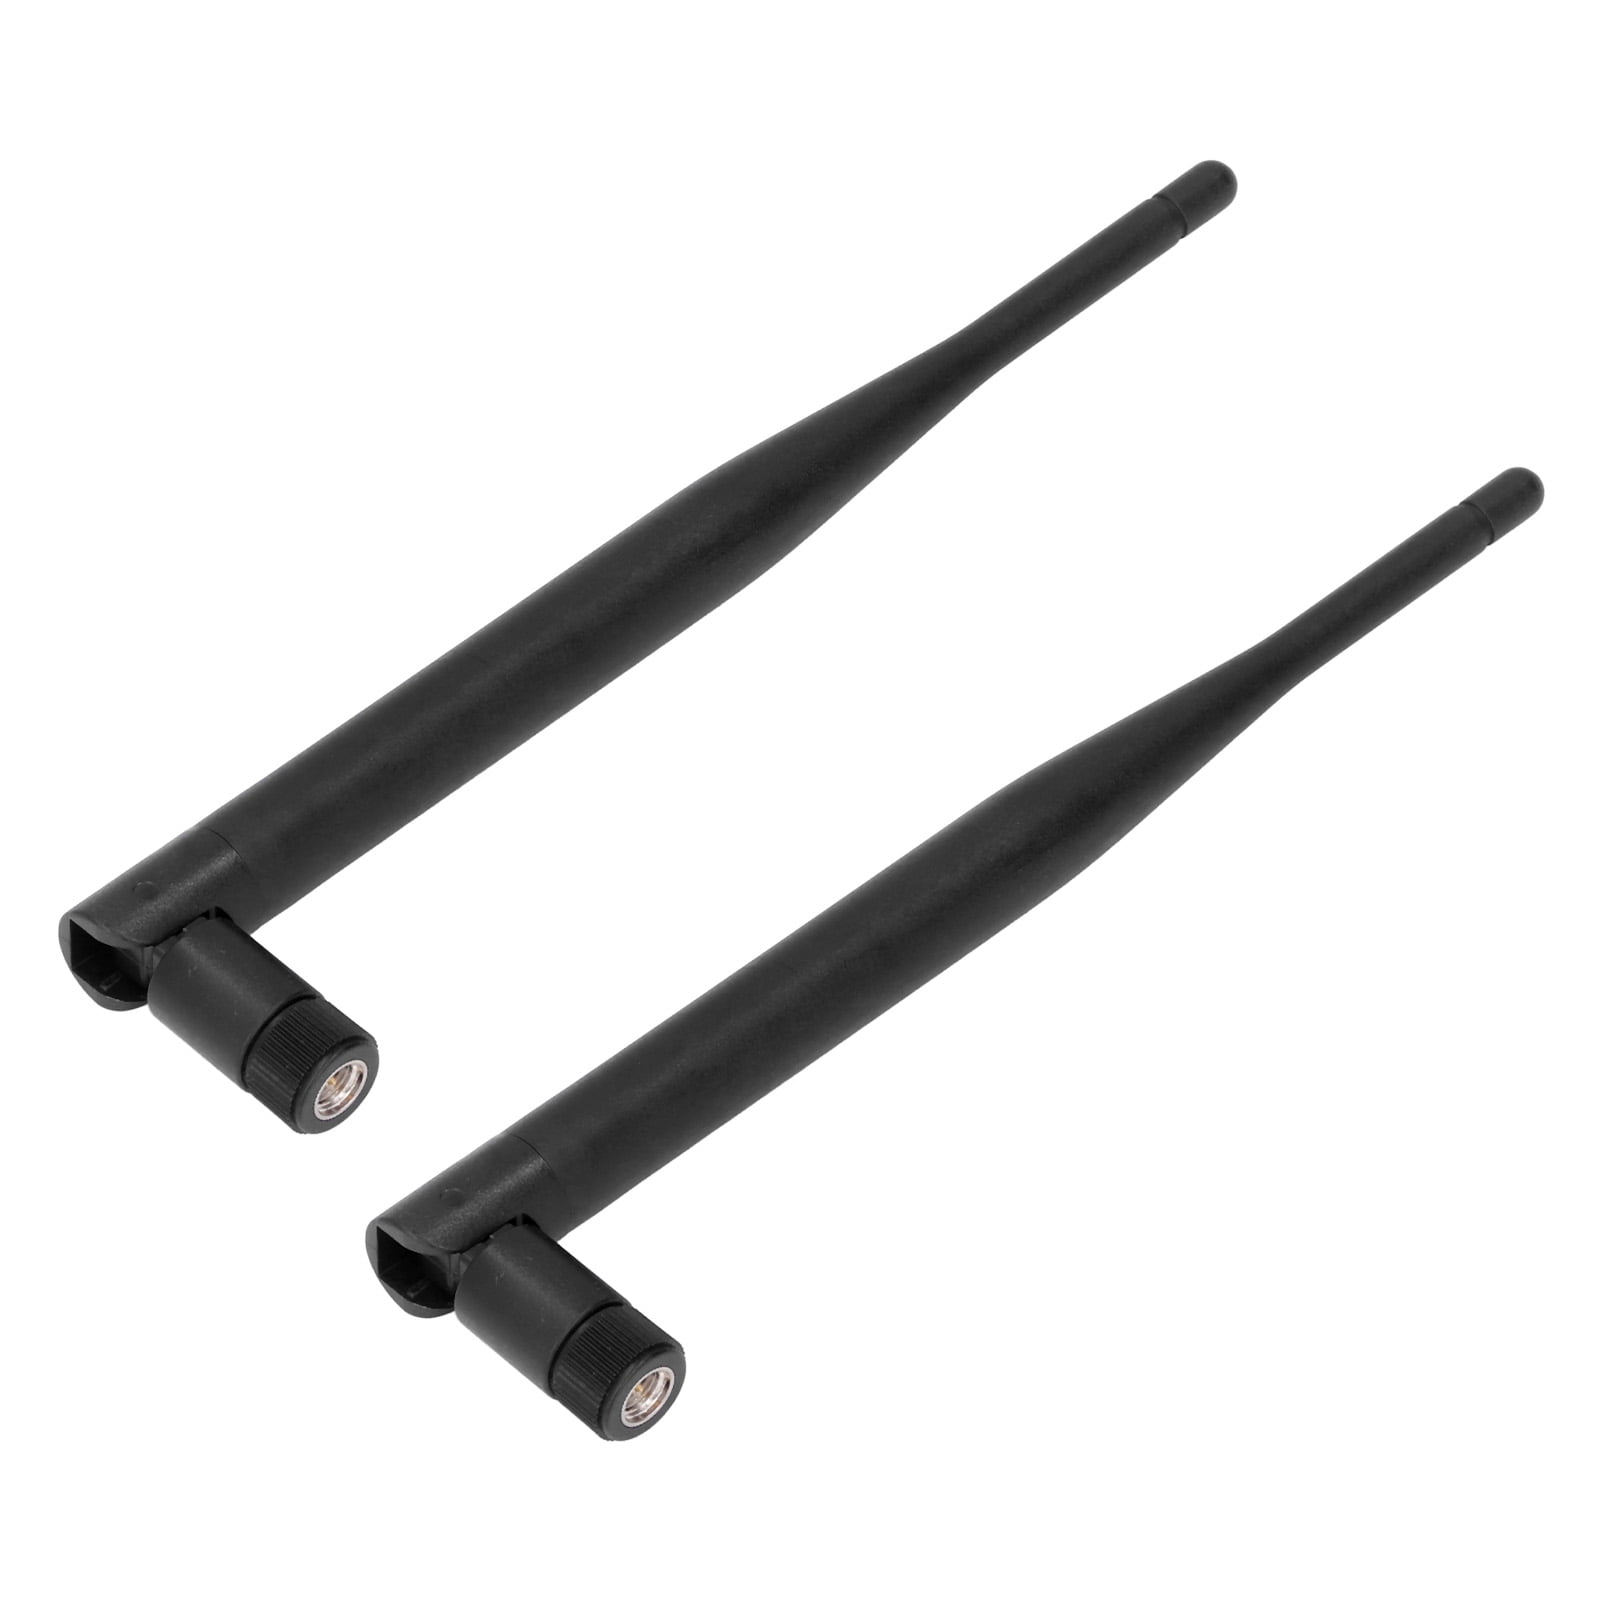 Yuly SMA-M WiFi Antenna Dual Band 2.4G 5.8G Flat Paddle Aerial for Wireless Network Card Router Modem 5dBi 